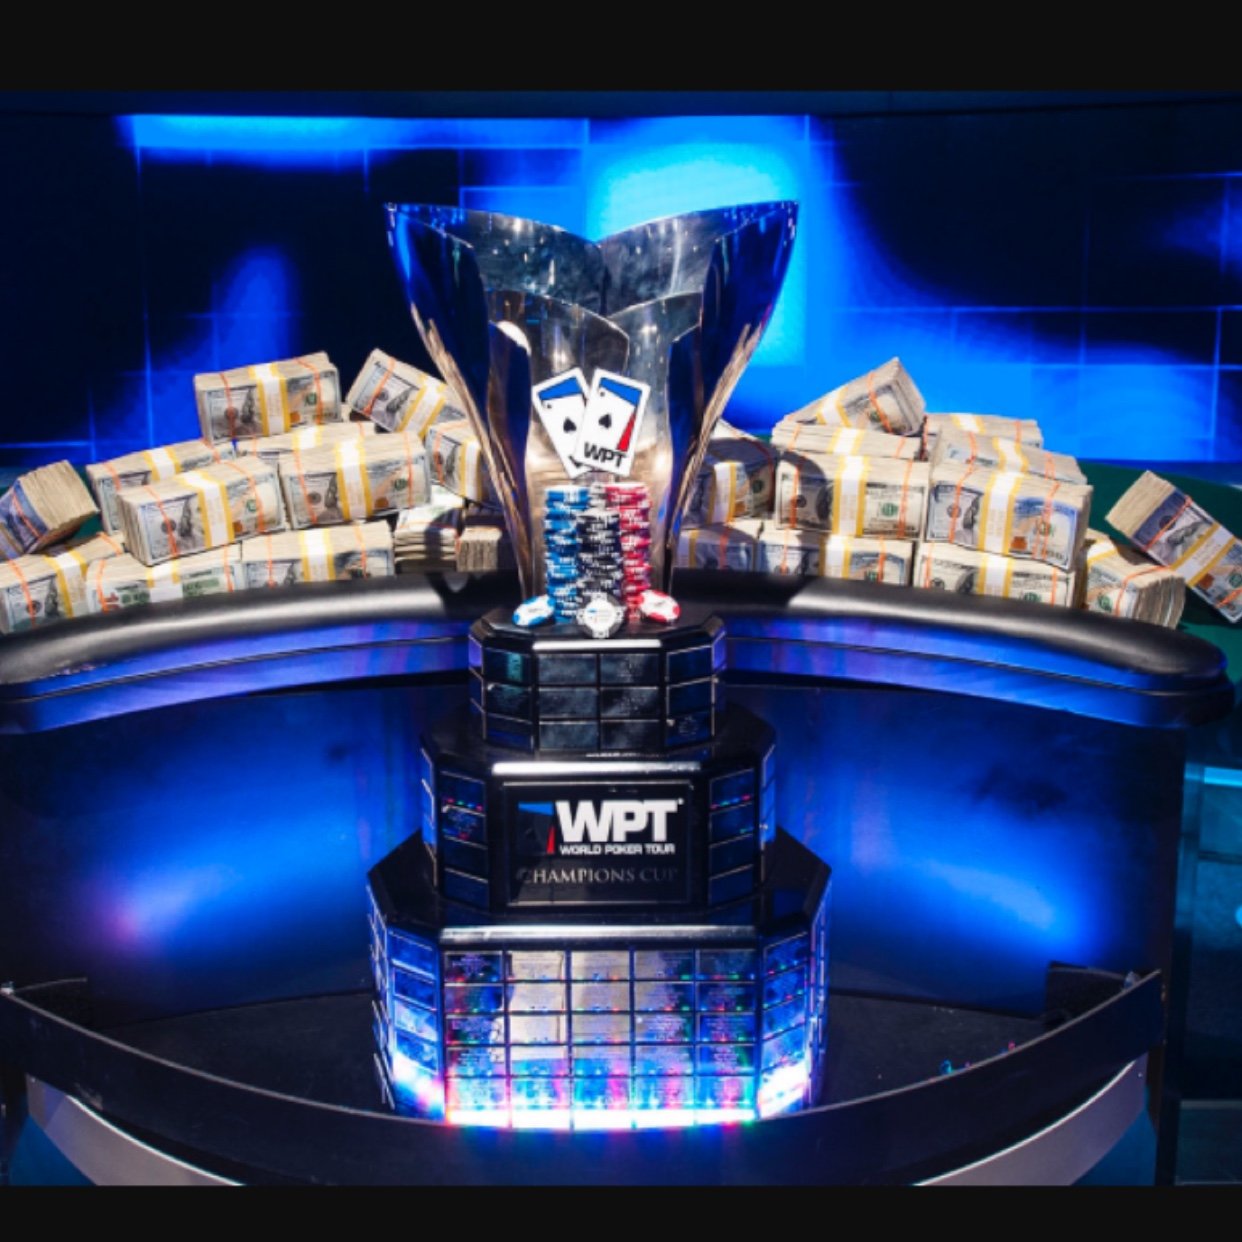 Only following @WPT Champions Club members.
#WPTChampionsClub players at eligible to play in the WPT Tournament of Champions June 1-3, 2019.